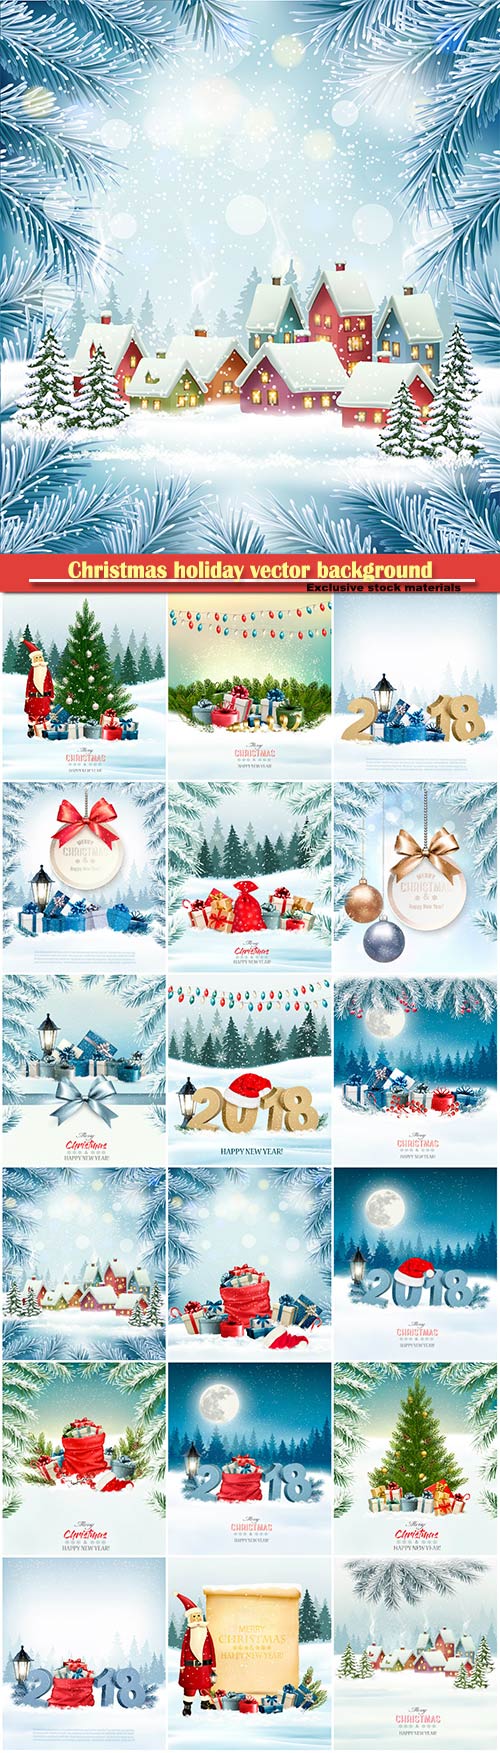 Christmas holiday vector background with 2018 and red Santa hat